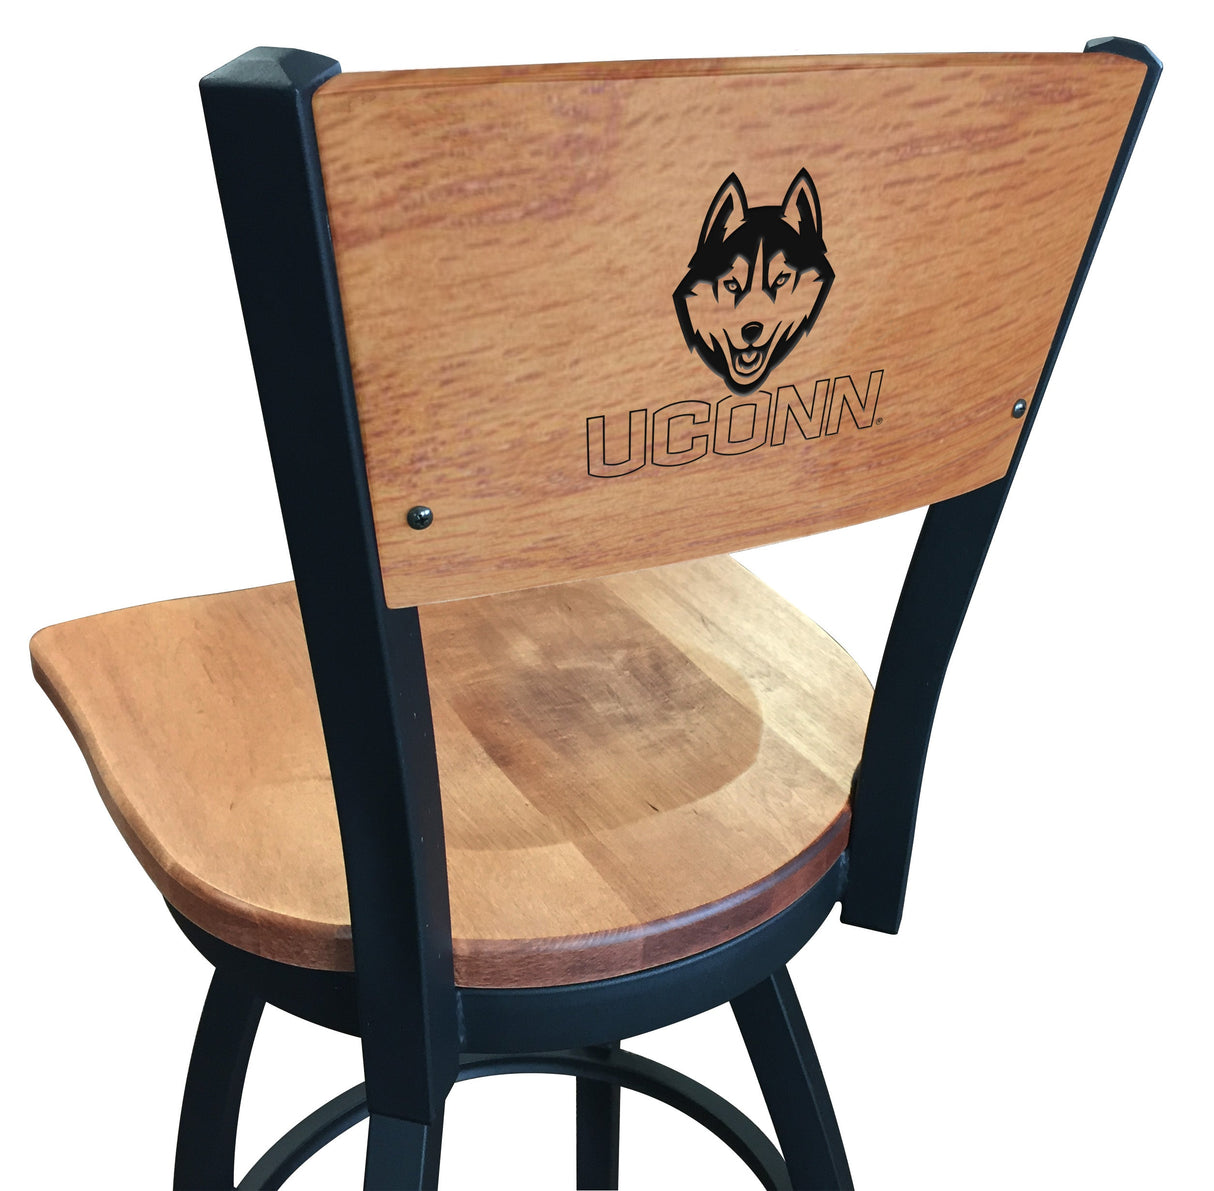 University of Connecticut Huskies L038 Laser Engraved Bar Stool by Holland Bar Stool